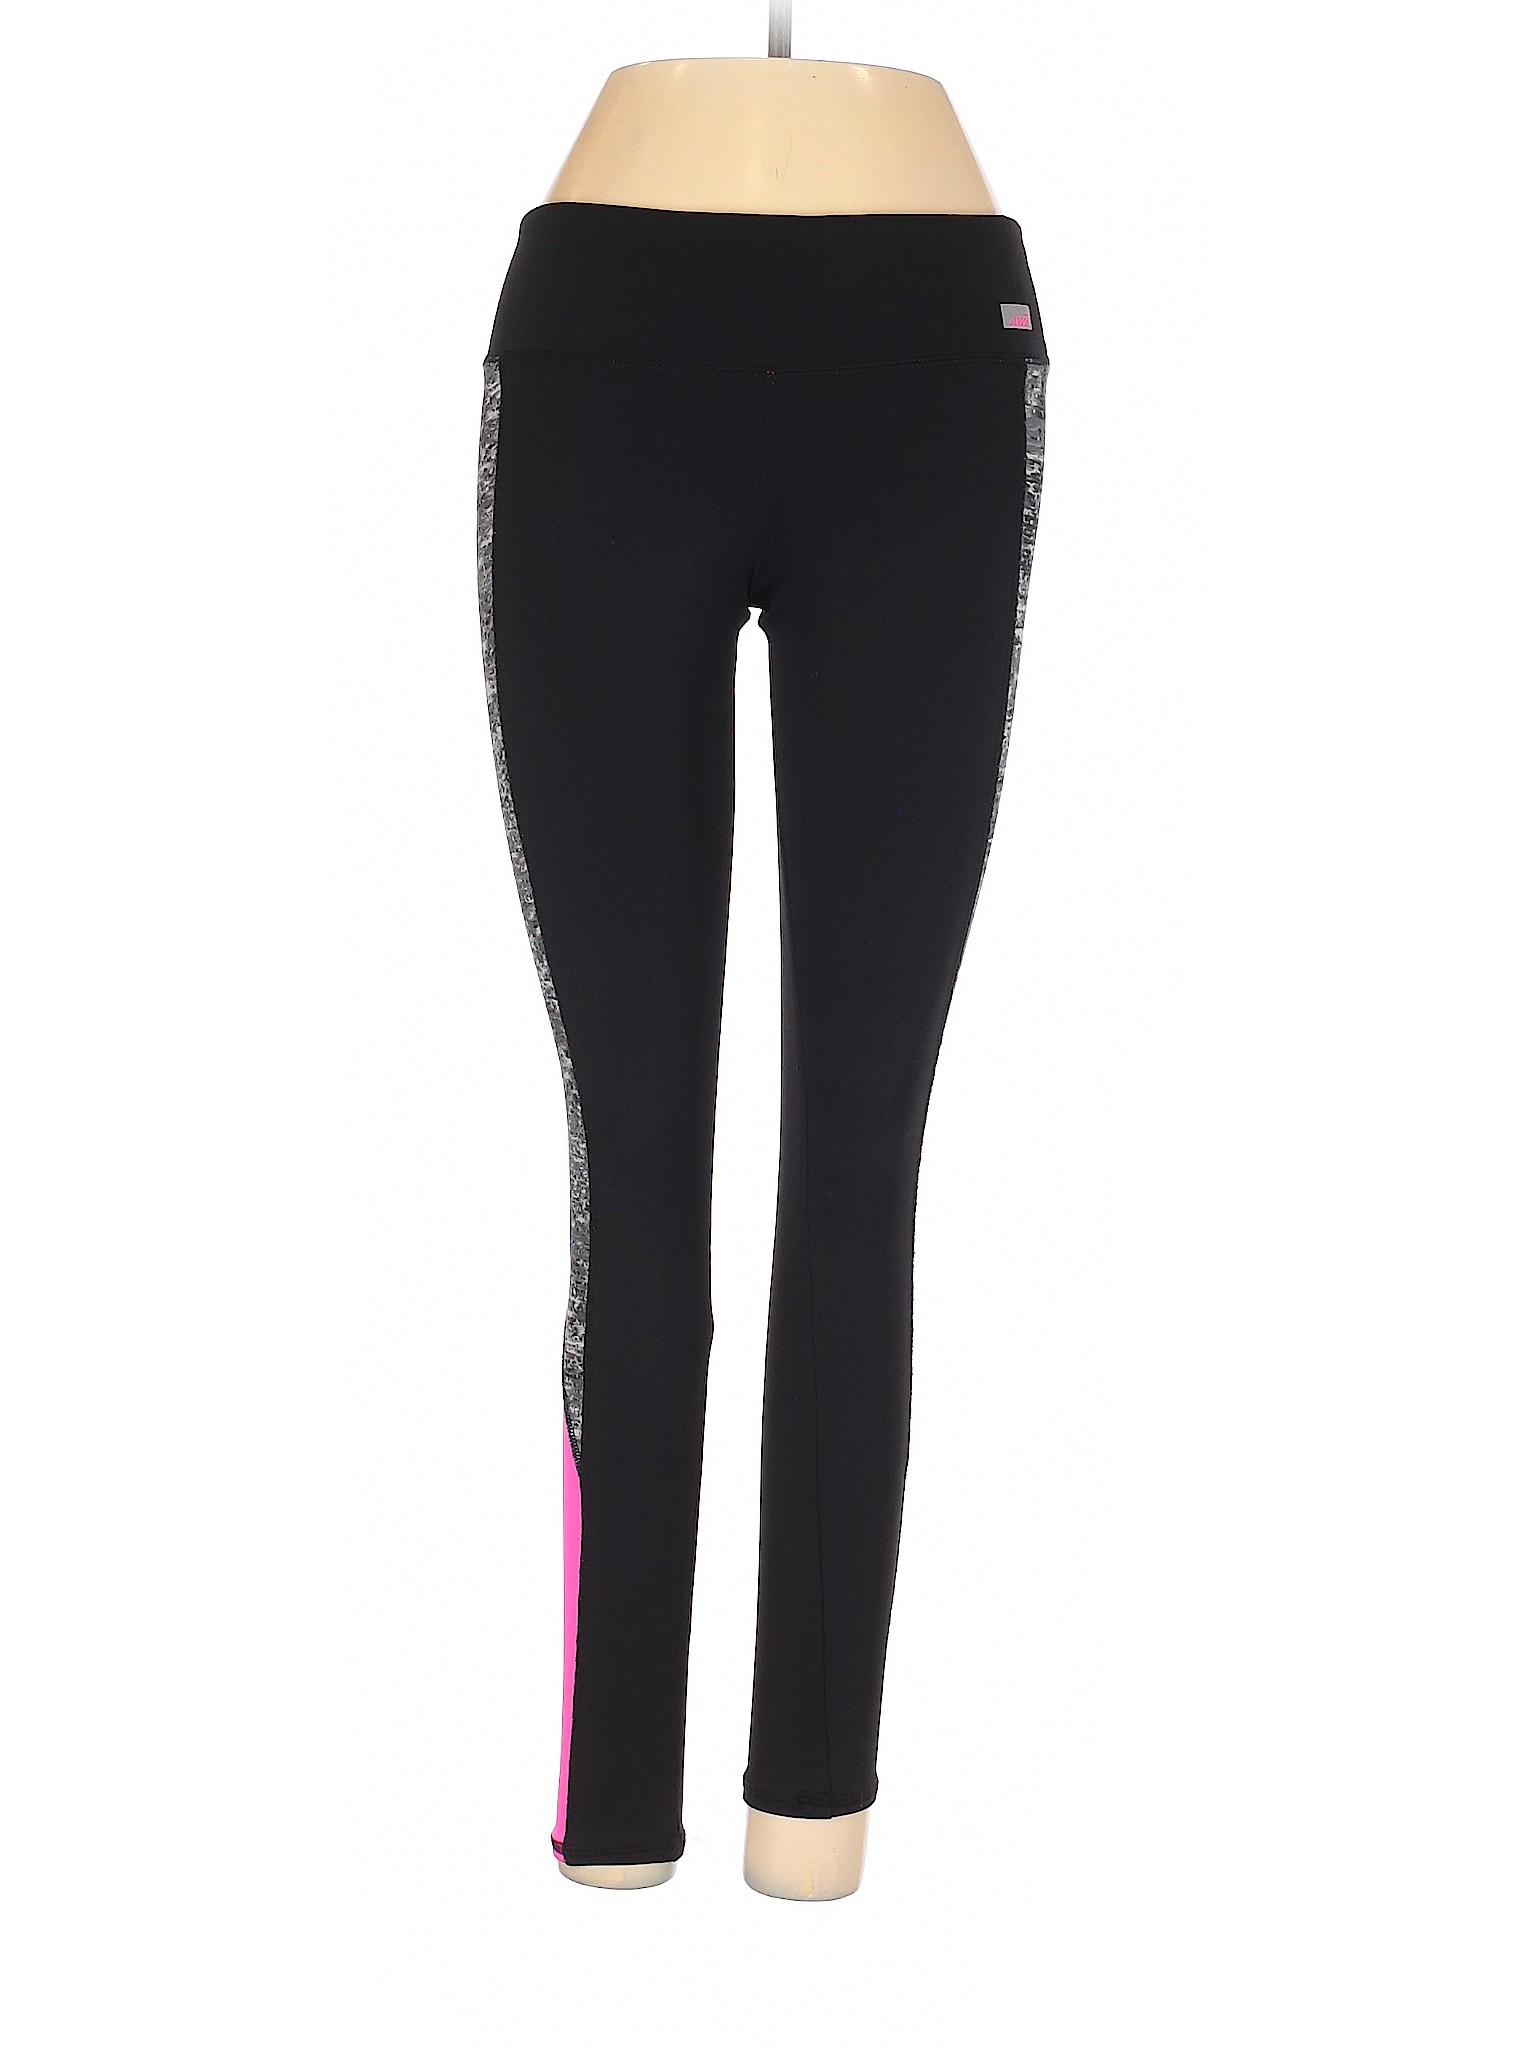 Avia Activewear Women Leggings with Side Pockets (Black, 2XL) 20 at   Women's Clothing store